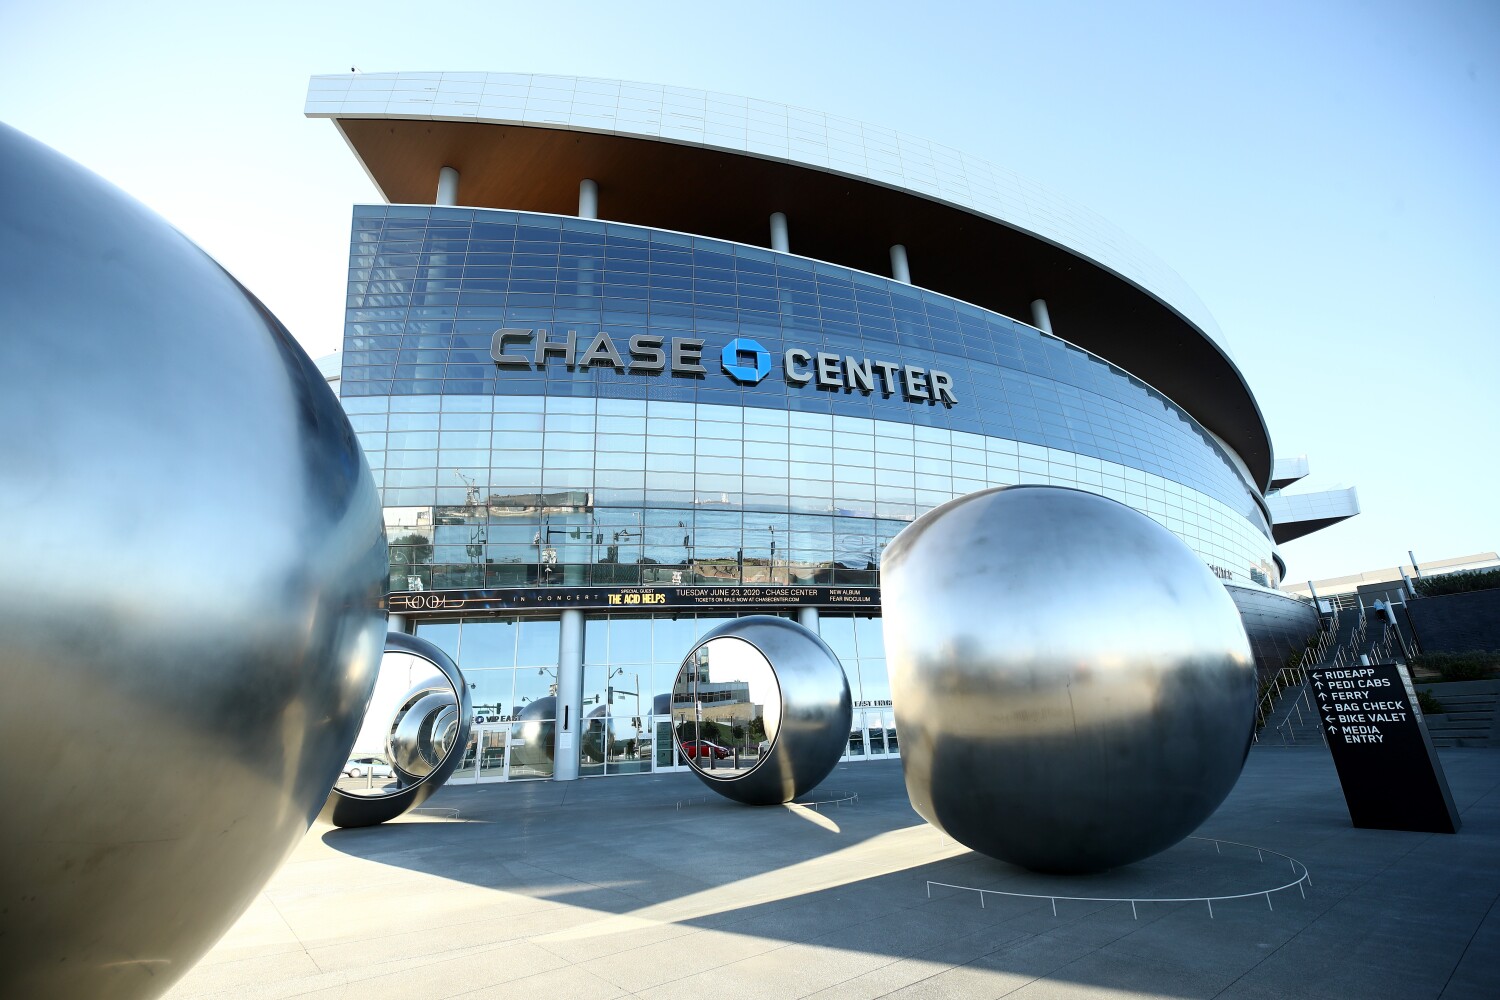 One dead, two injured in falls during Phish concert at San Francisco's Chase Center